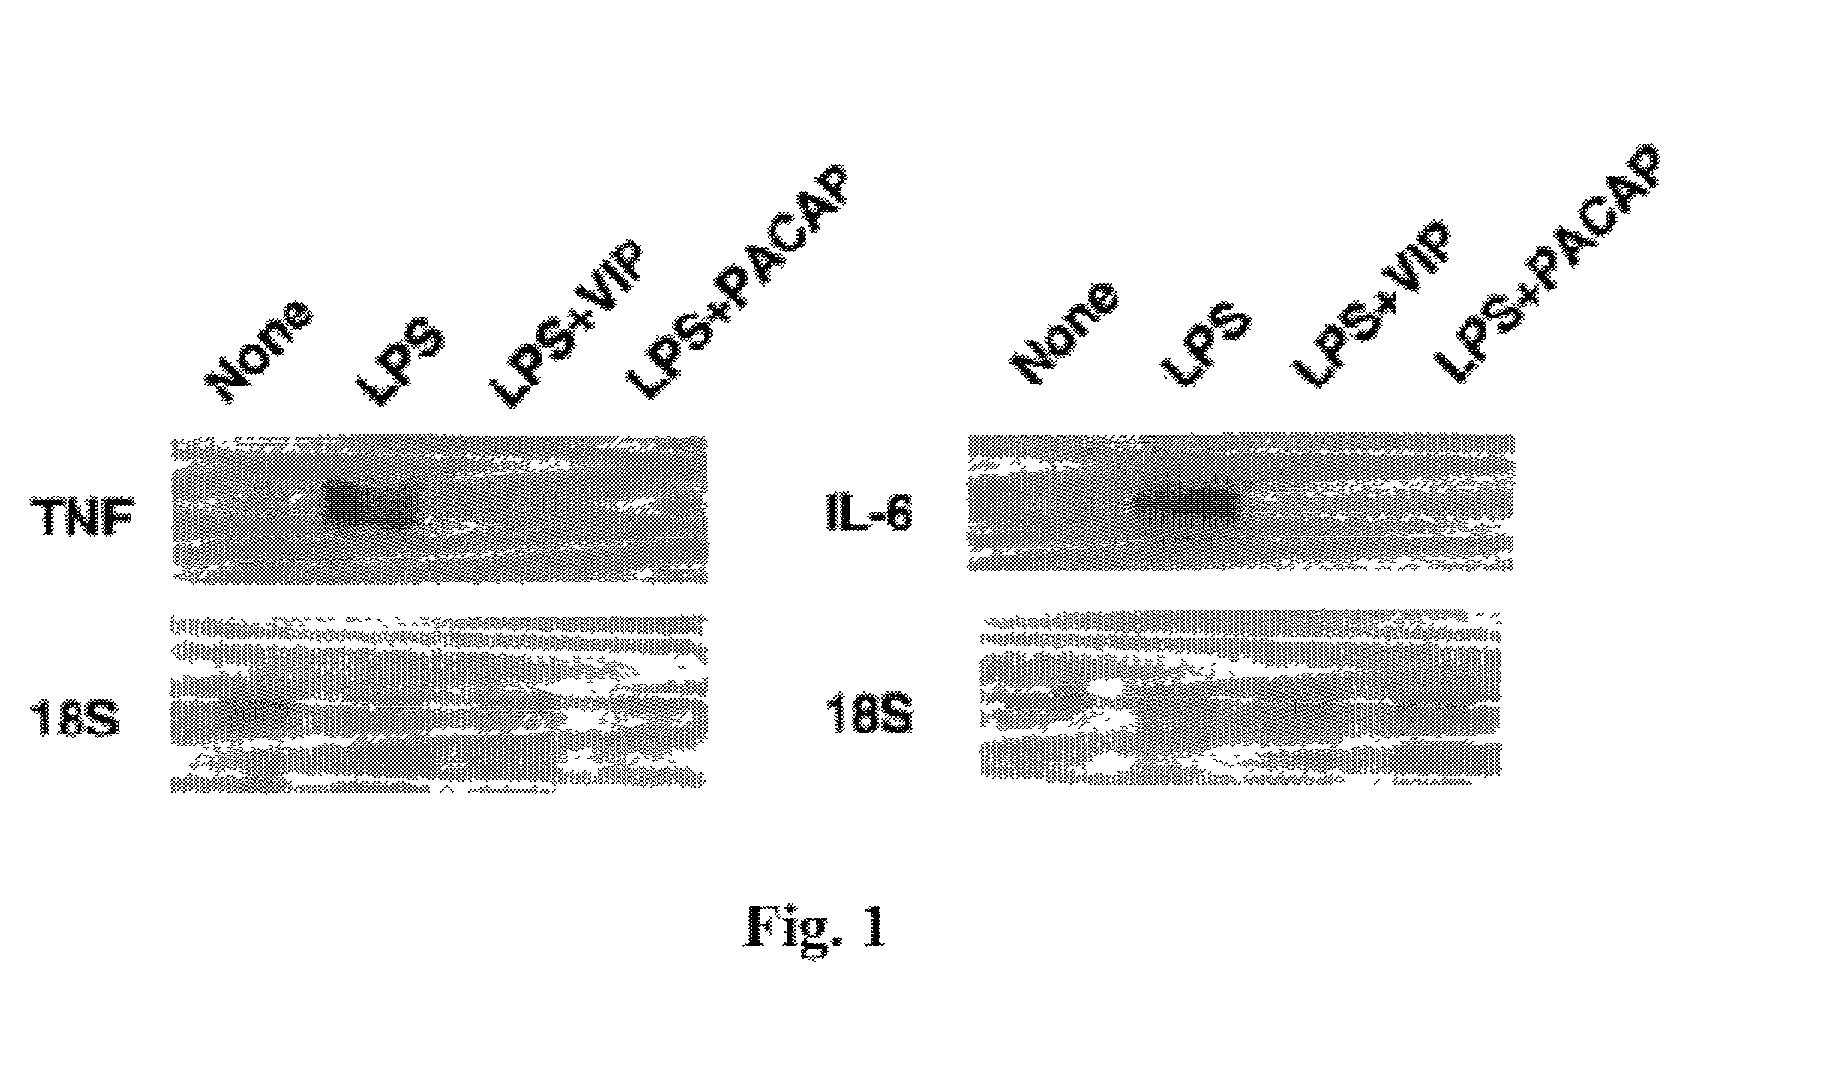 Method for treating and preventing septic shock with VPAC1R, VPAC2R and PAC1R agonists